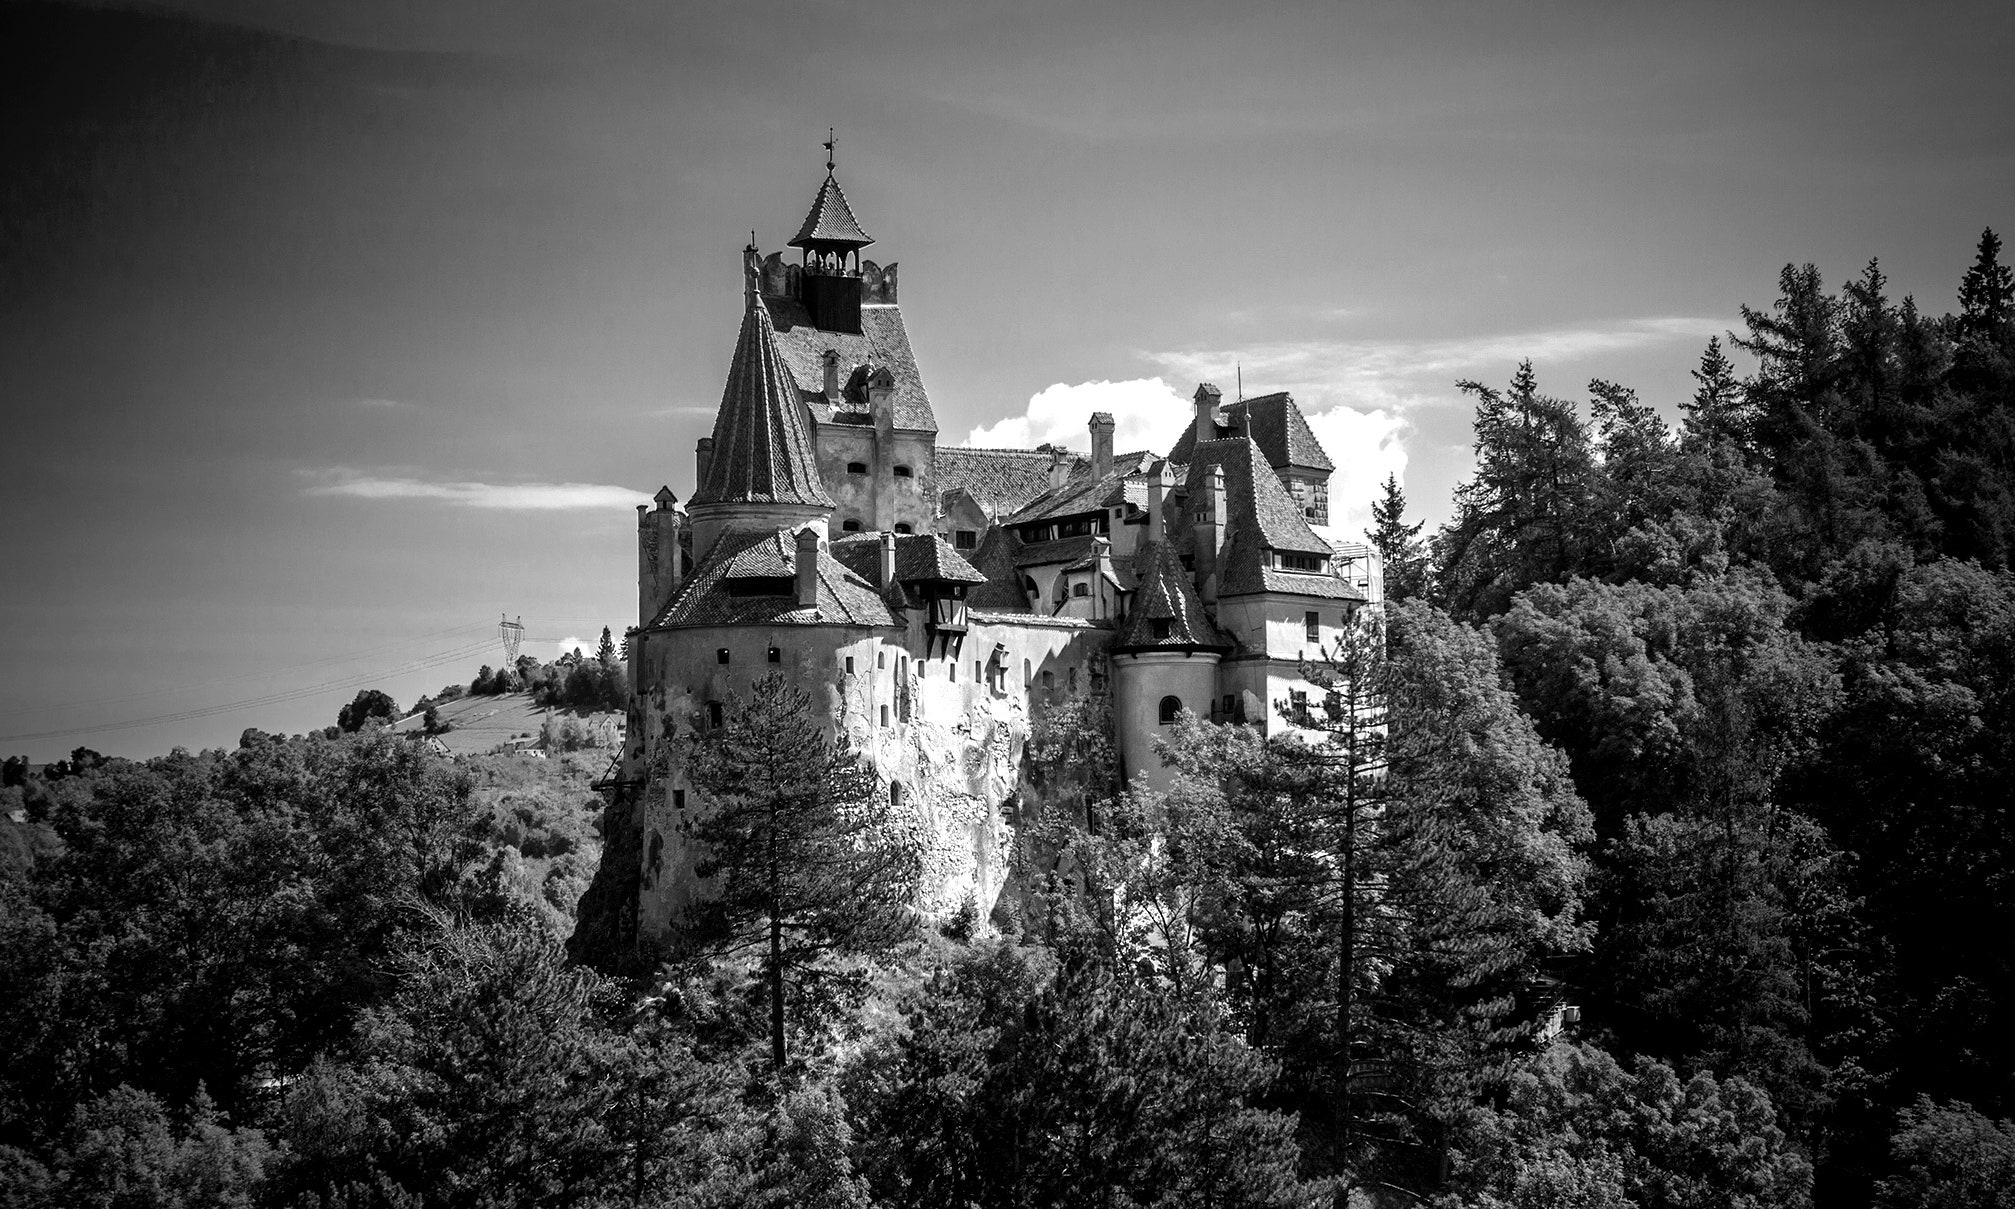 The Man Who Owns Dracula's Castle Wants to Rebrand It